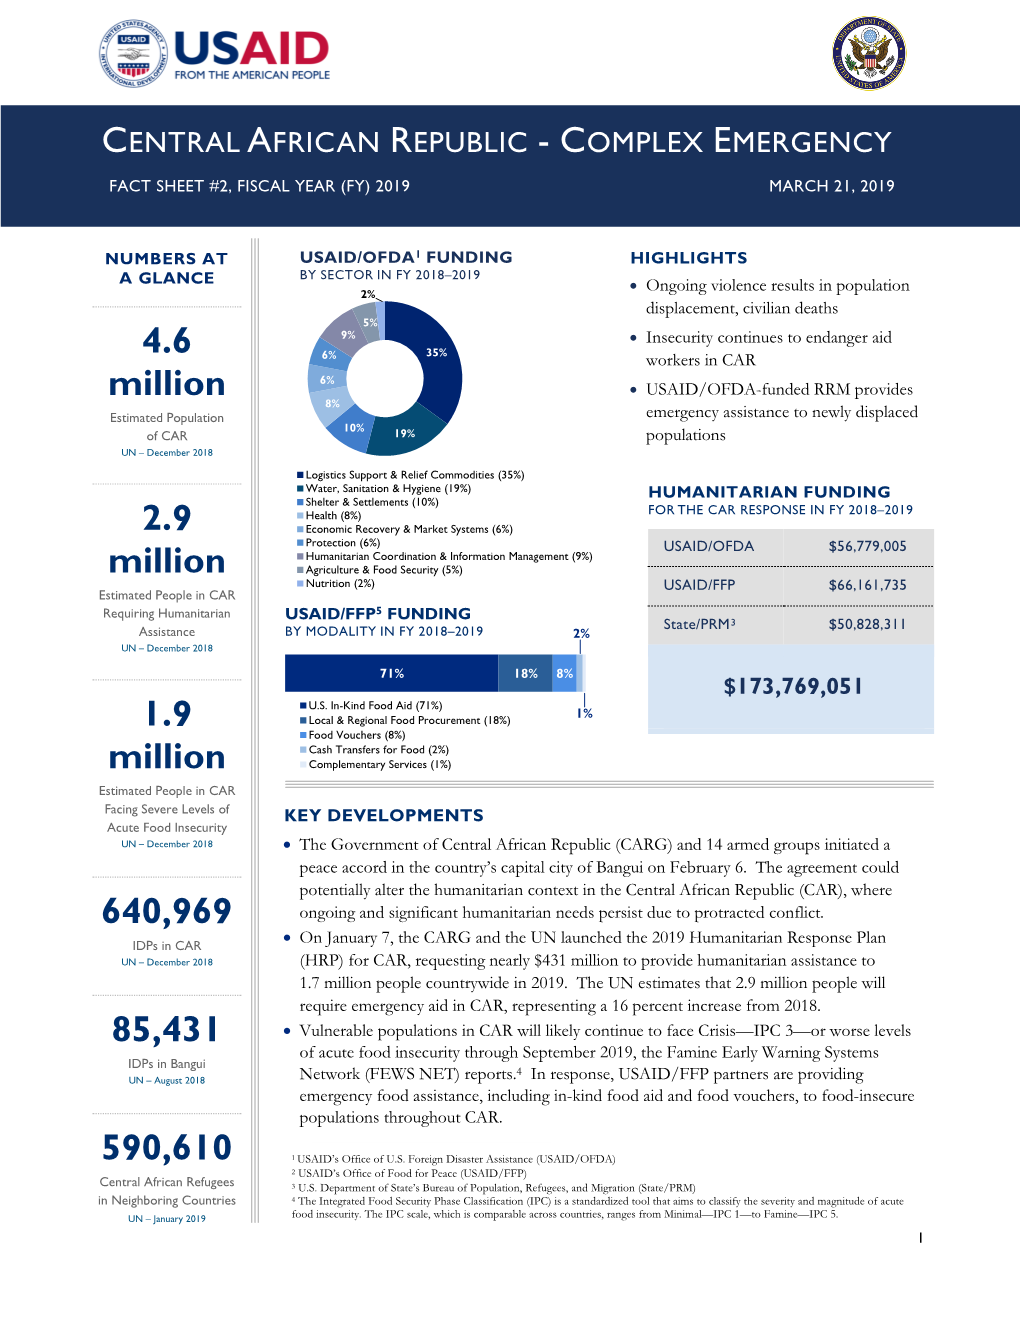 Central African Republic Complex Emergency Fact Sheet #2